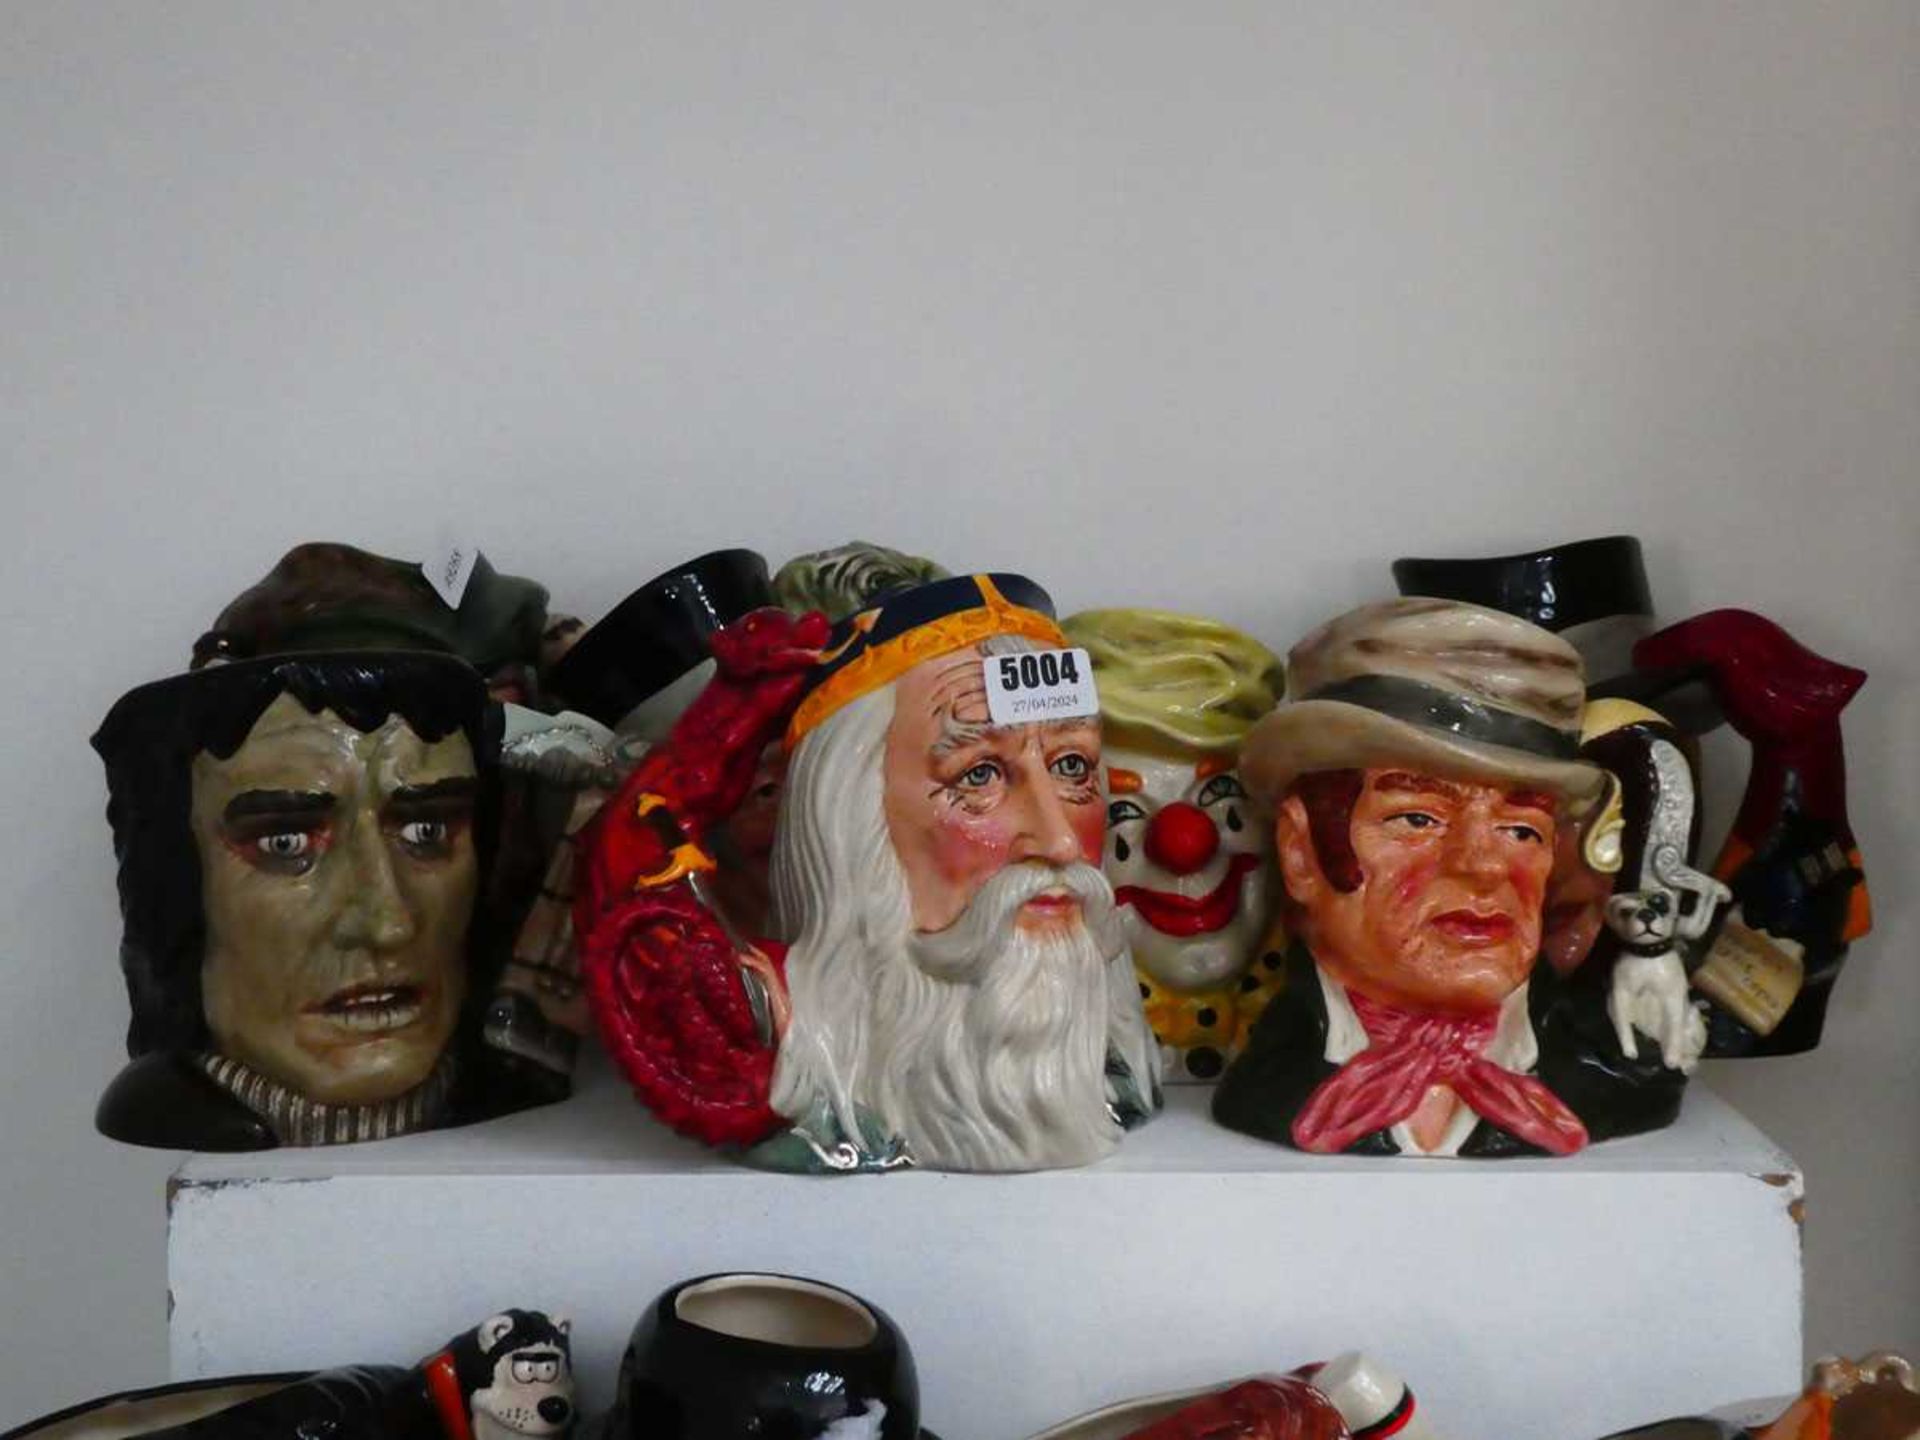 7 large character jugs depicting fictional characters, to include Phantom of the Opera, Bill